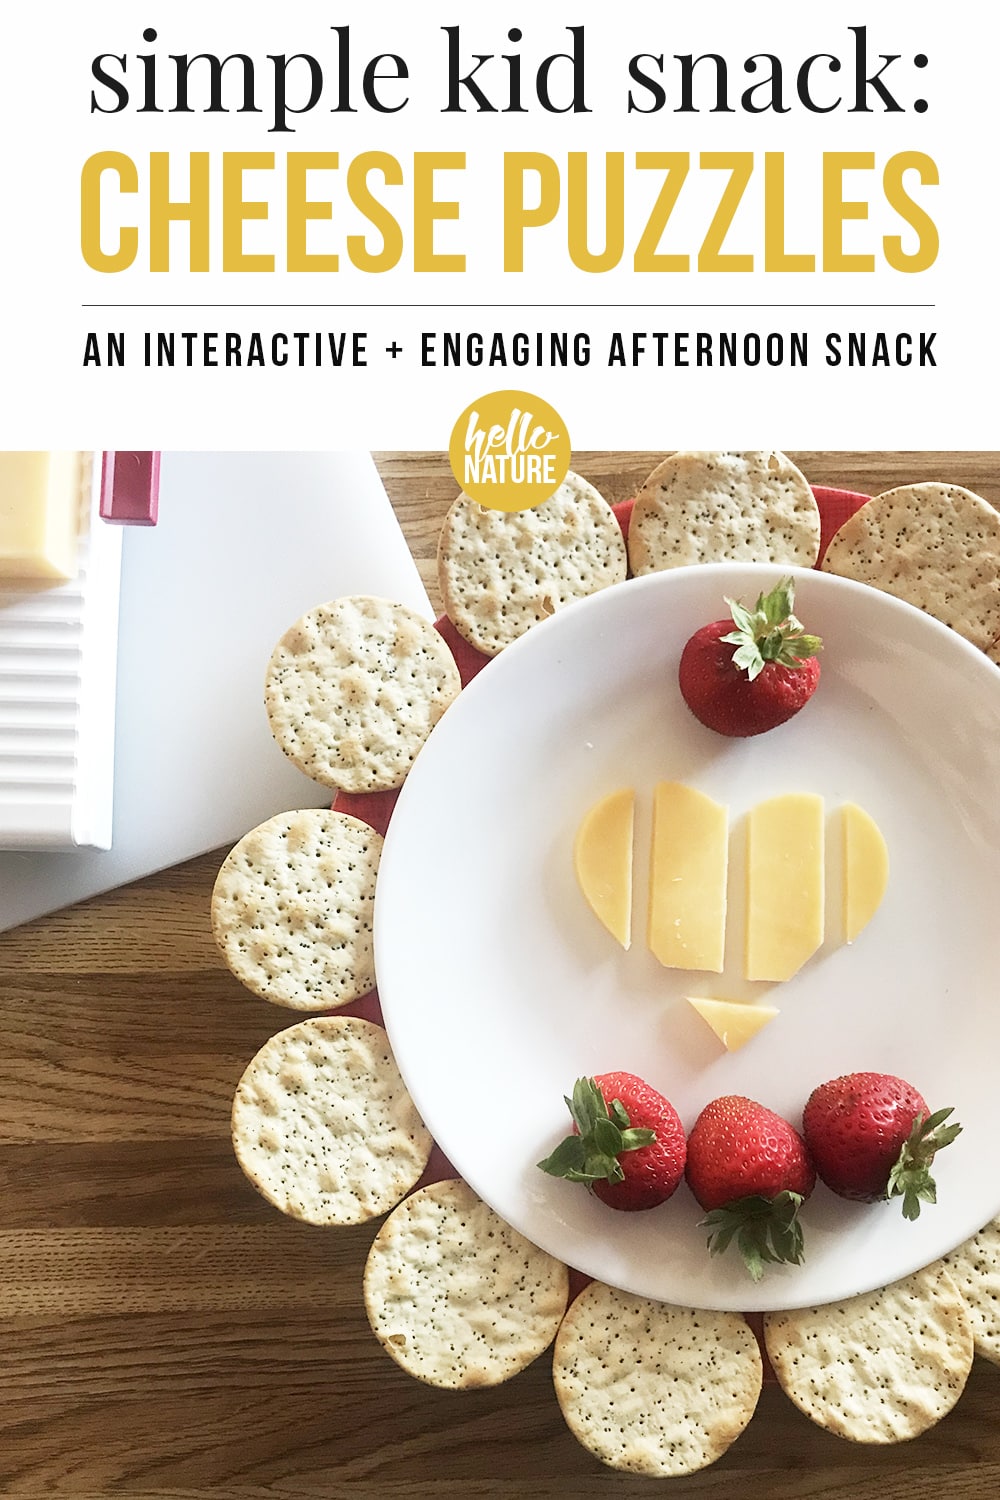 Simple Kid Snack: Cheese Puzzles